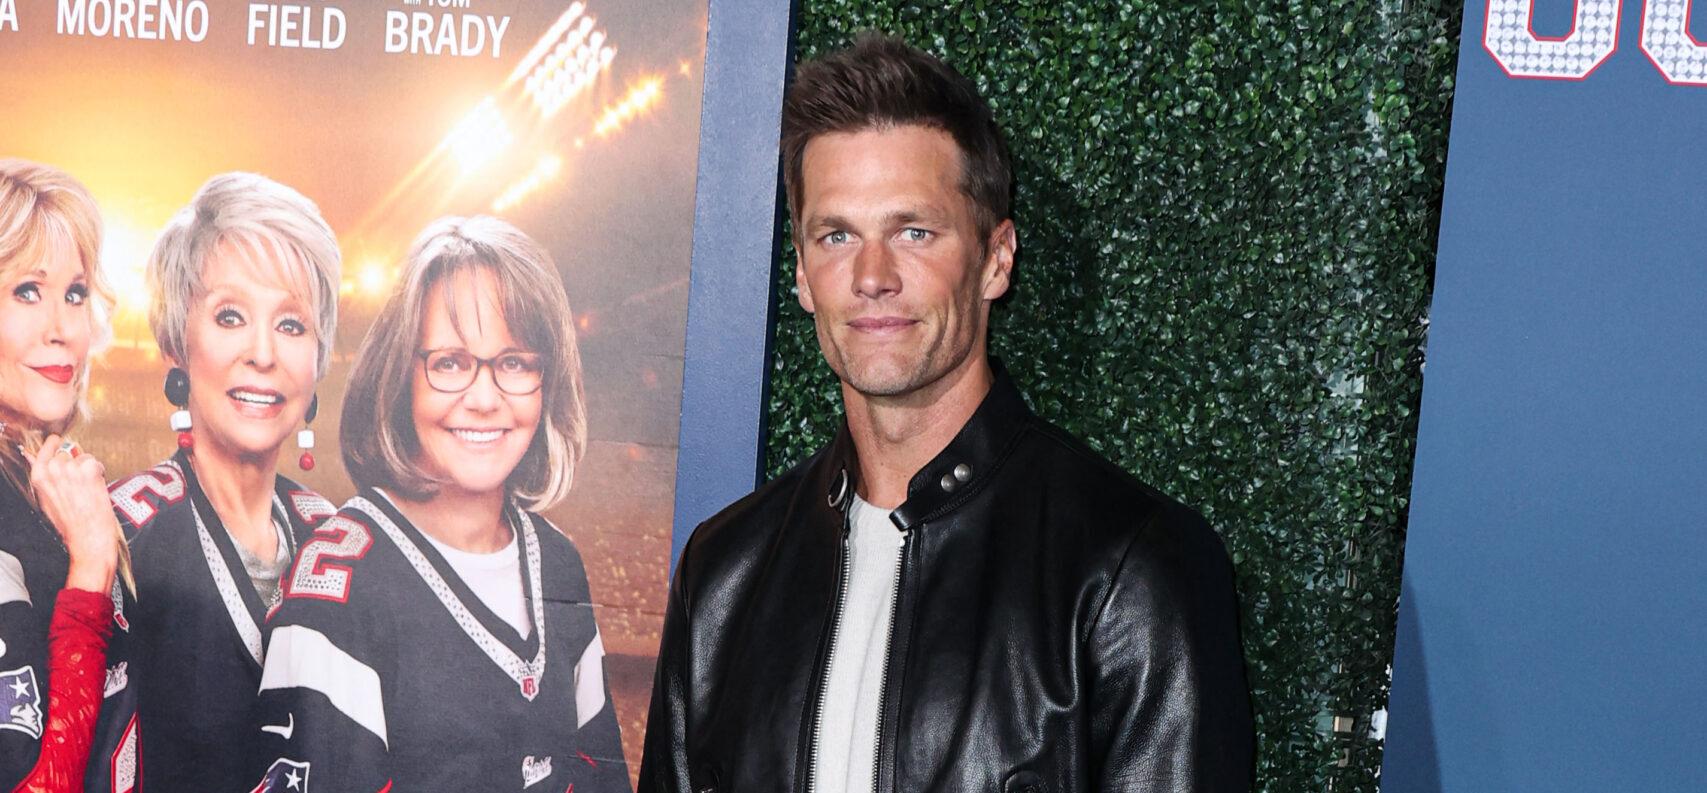 See Tom Brady’s Hilarious Reaction To Riding Tower of Terror At Disney